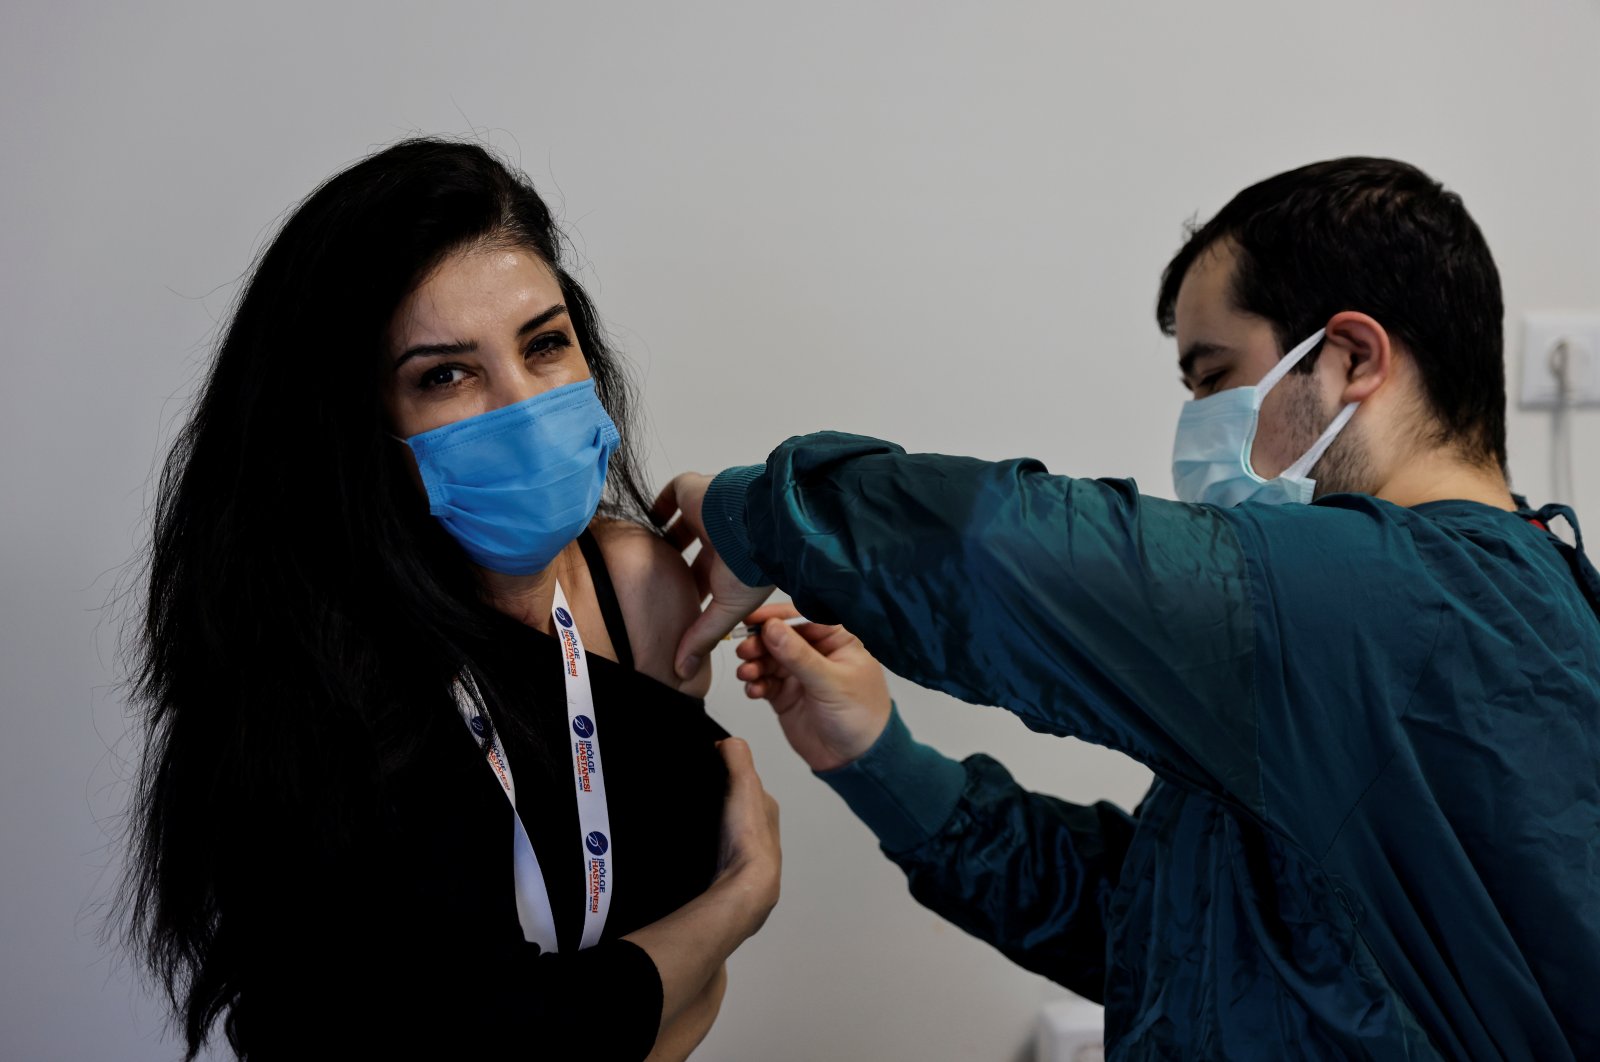 A woman receives a shot of the Pfizer-BioNTech vaccine at a hospital in Istanbul, Turkey, April 9, 2021. (REUTERS PHOTO)